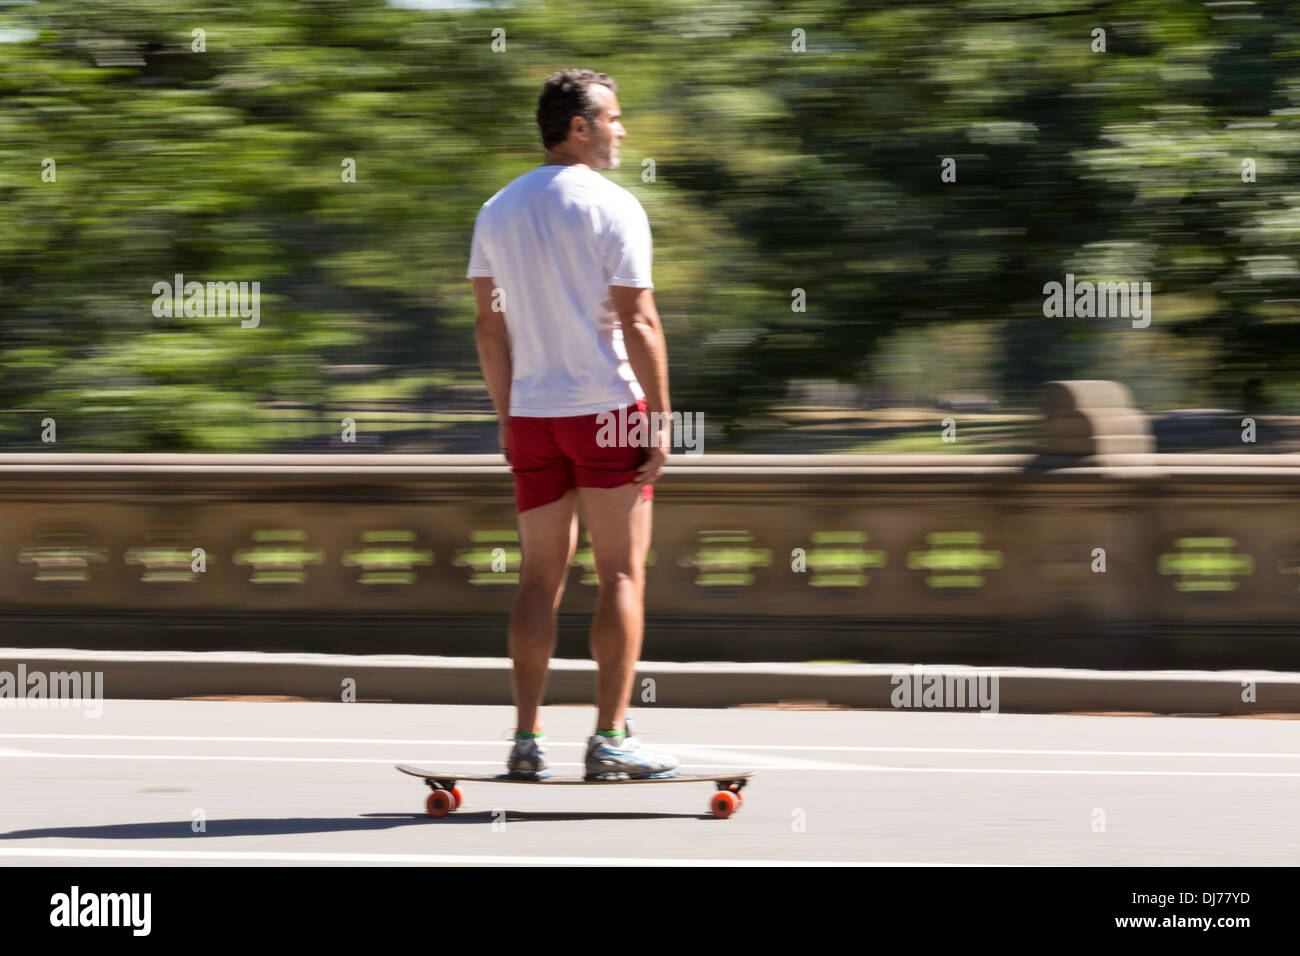 Man Coasts on his Skateboard in Central Park, NYC Stock Photo